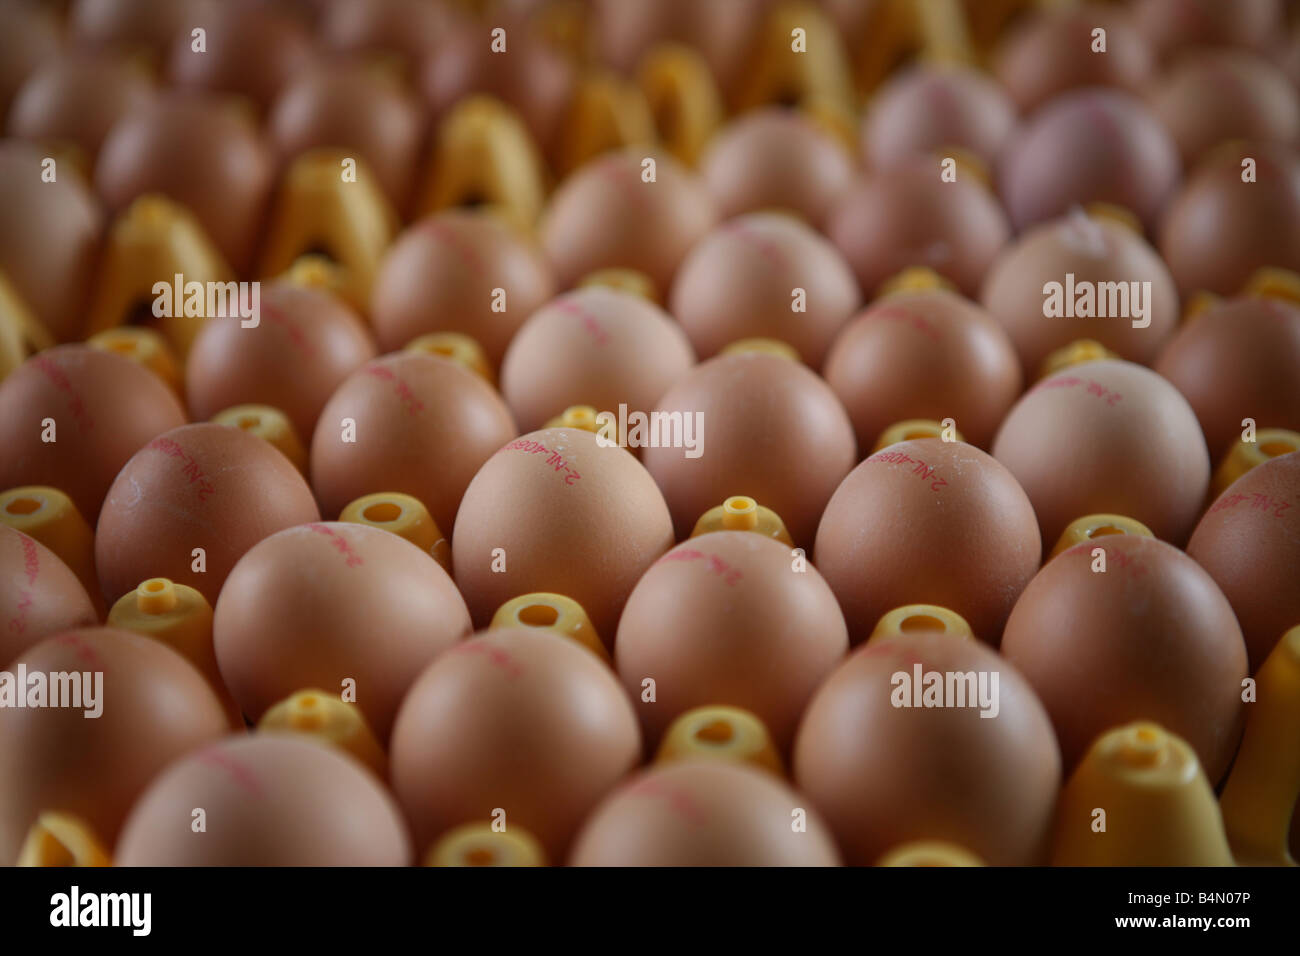 chickenare kept for egg production The chicken are not kept in gages but  can walk freely Maximum 9 chicken per square meter are allowed Stock Photo  - Alamy